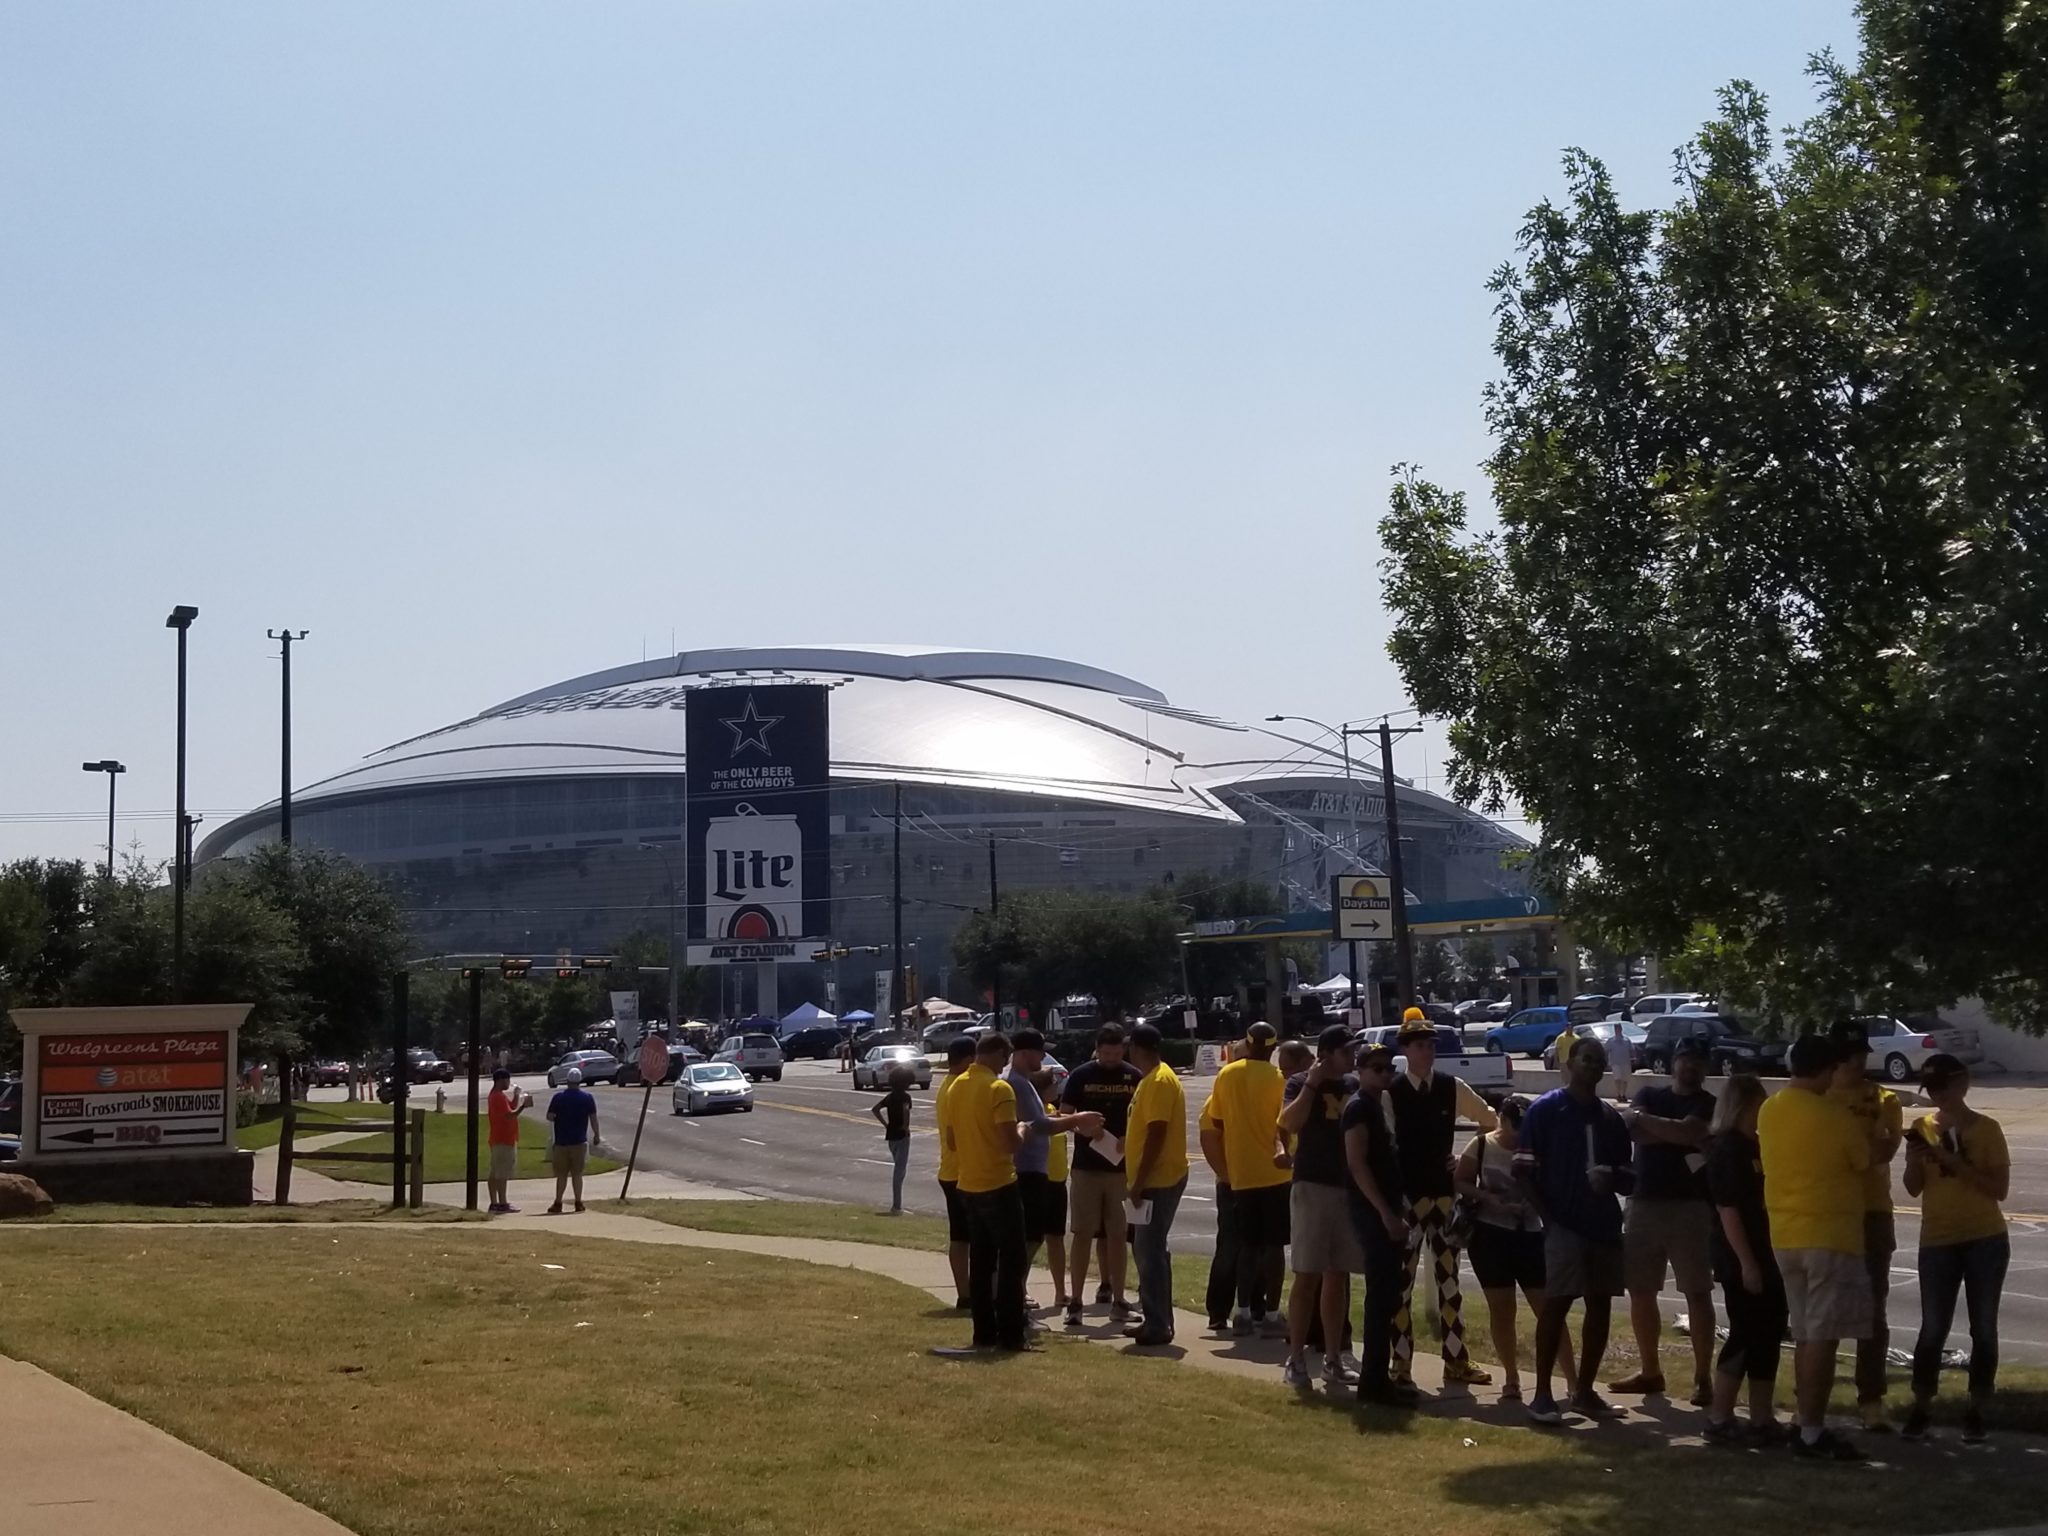 a group of people standing in front of a stadium